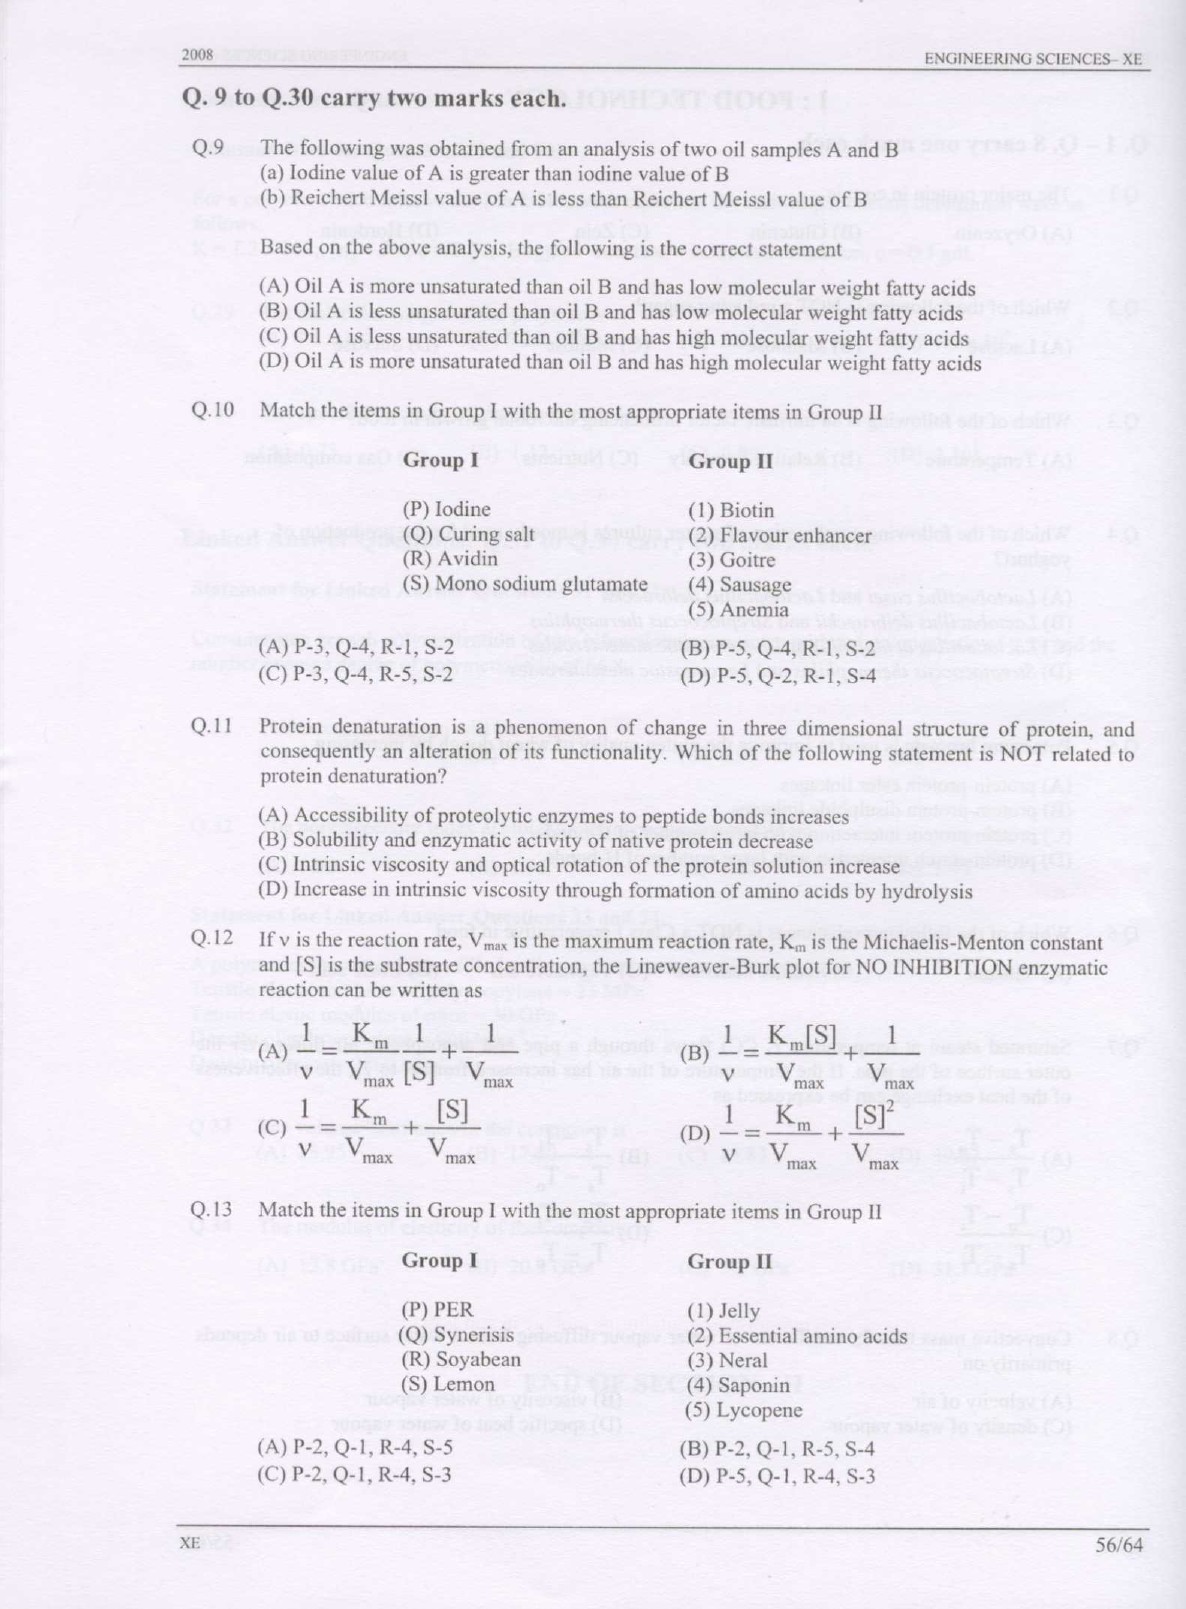 GATE Exam Question Paper 2008 Engineering Sciences 56